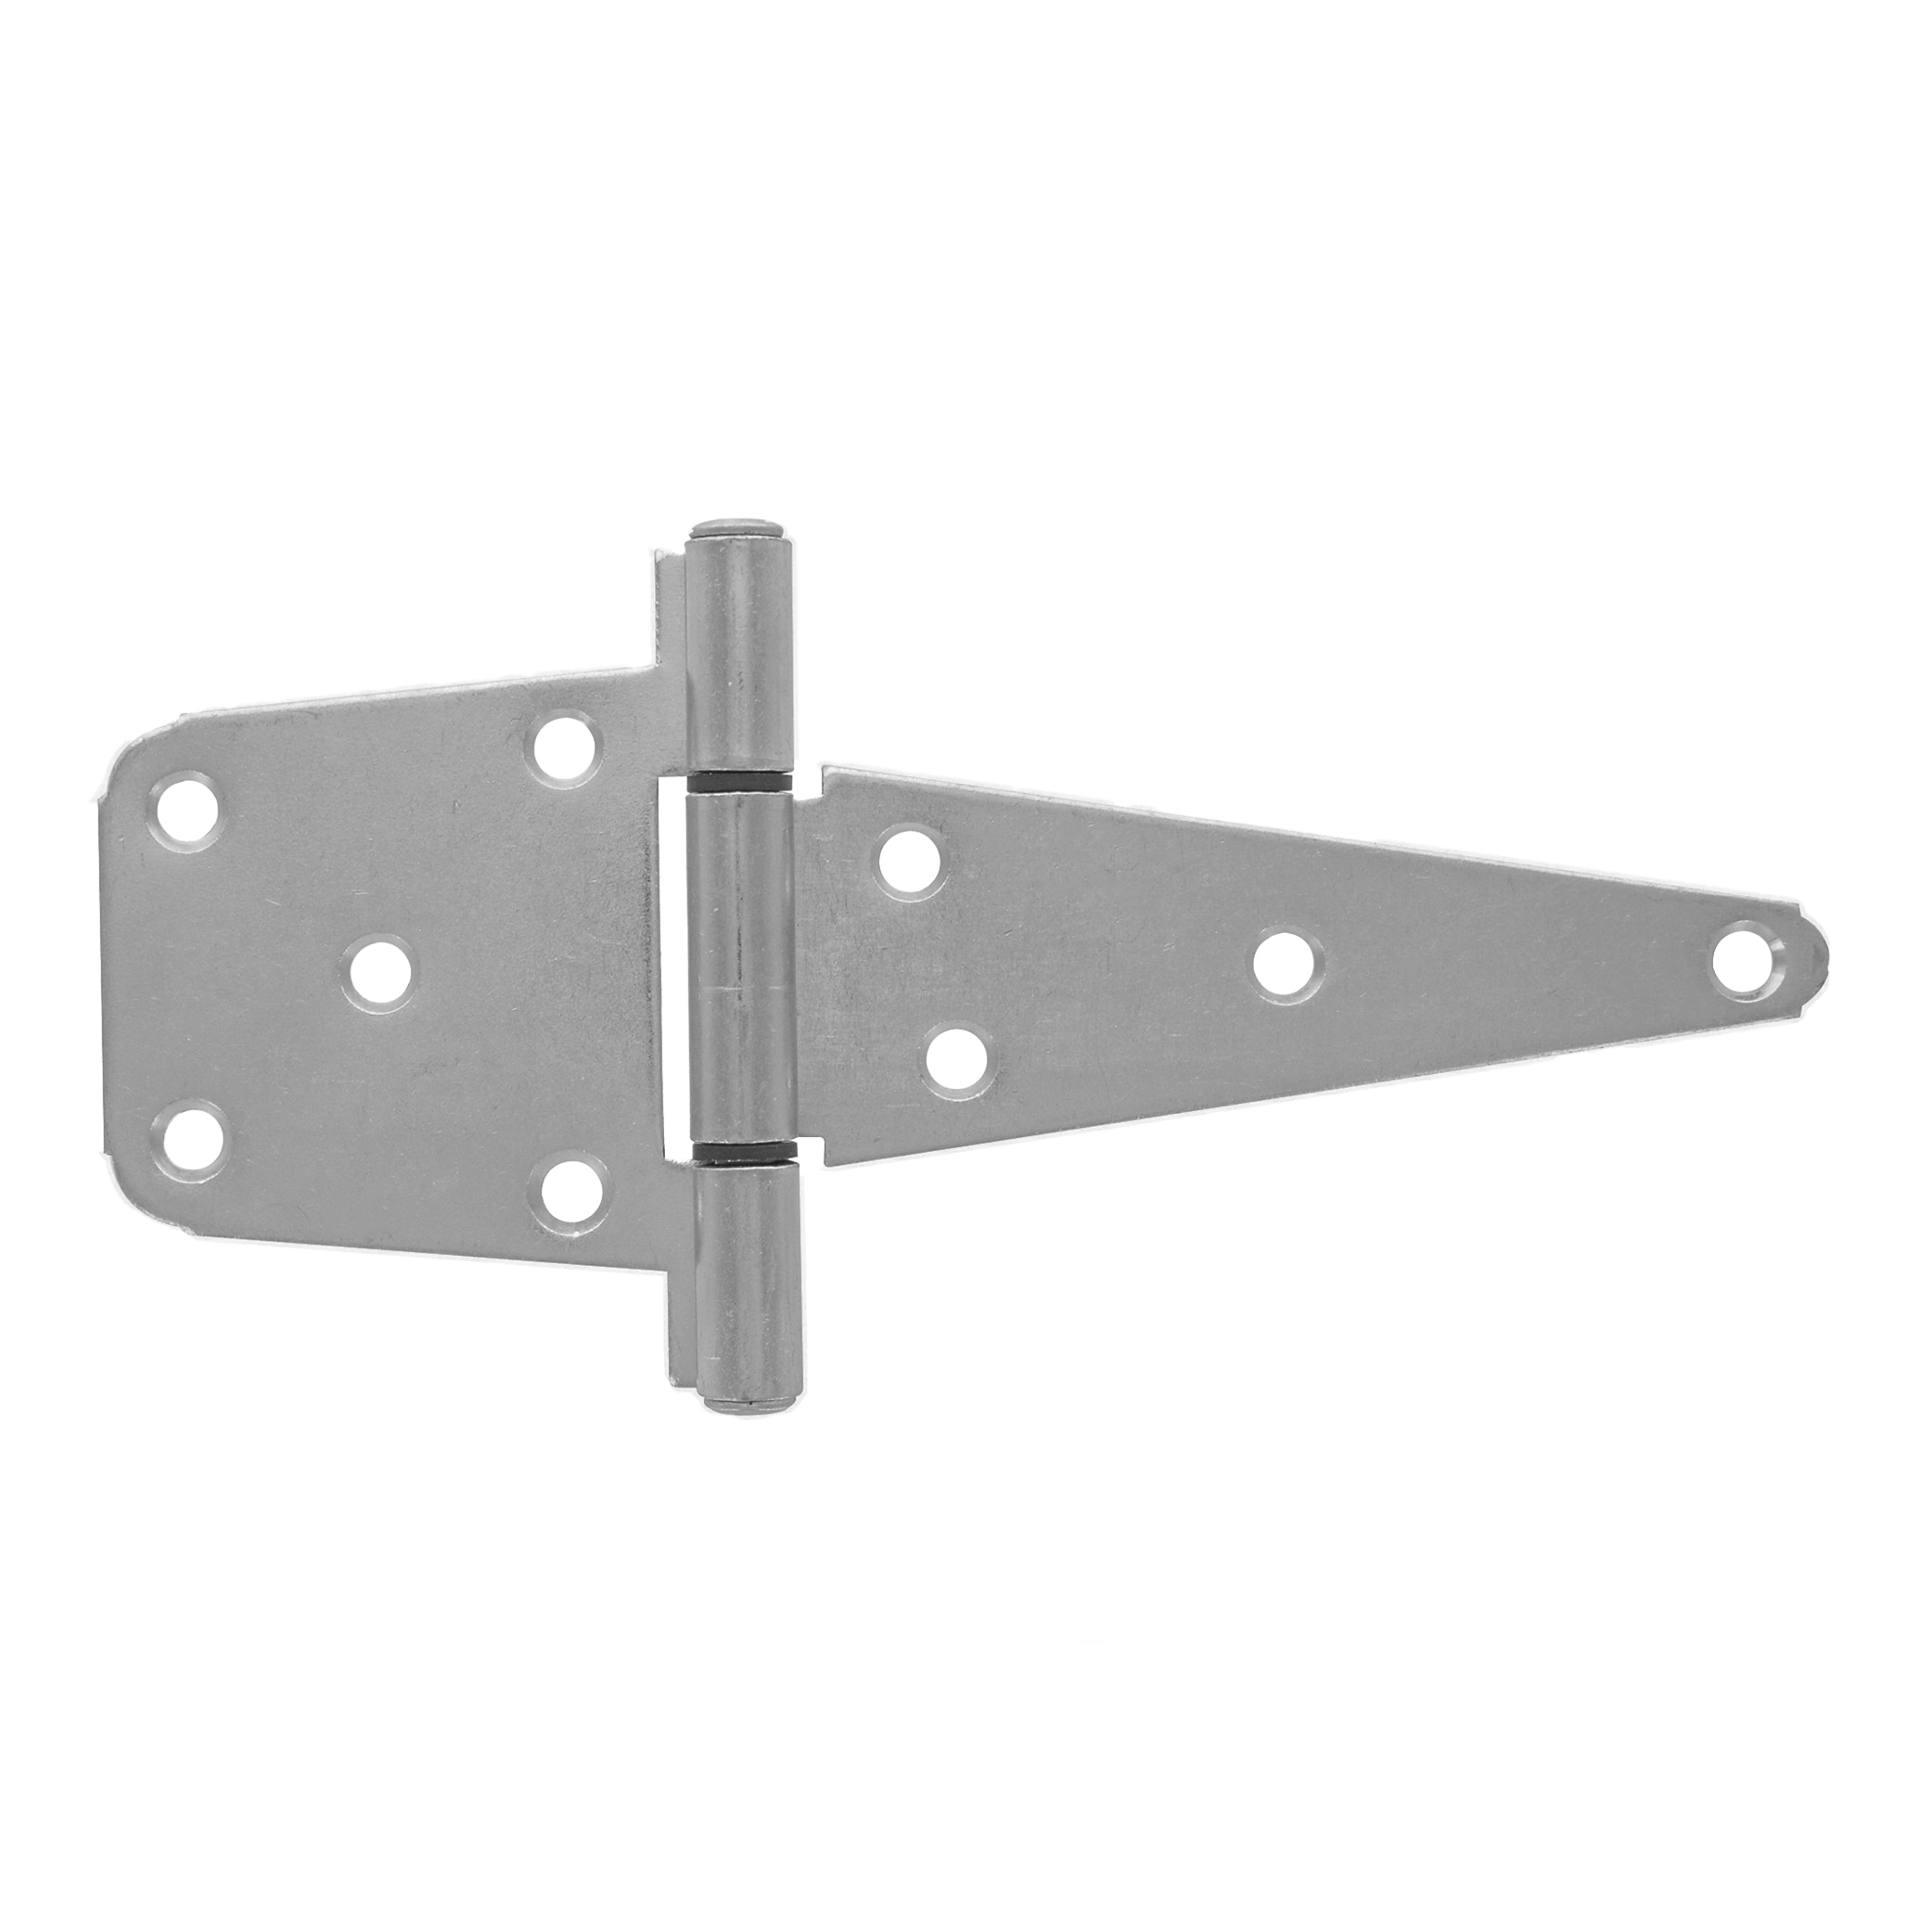 Stanley-National Hardware Zinc Gate Hinge In The Gate, 50% OFF